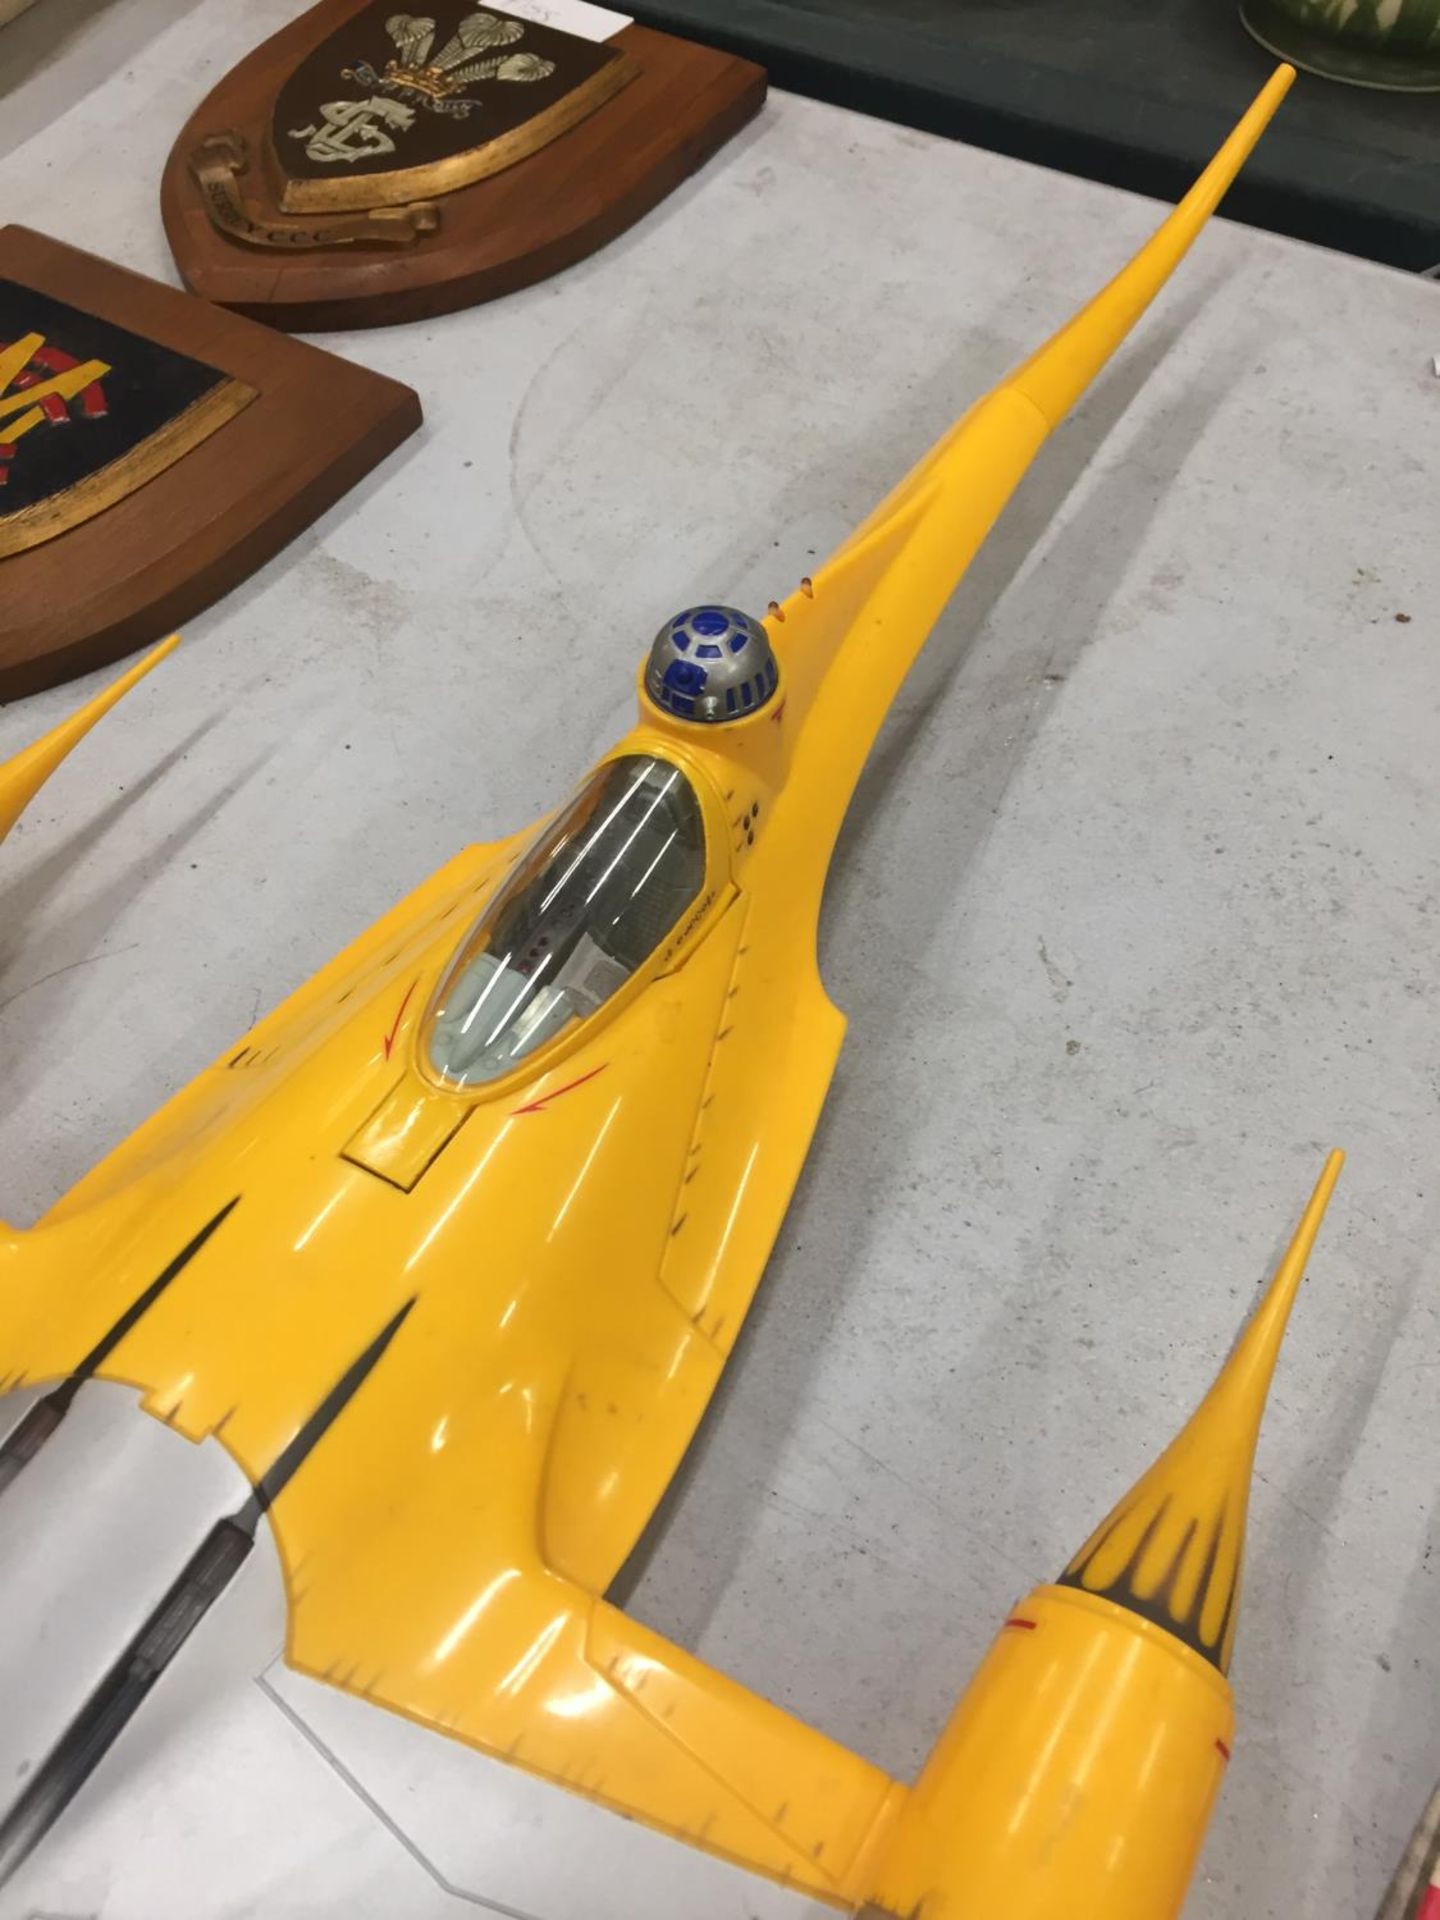 A STAR WARS ORIGINAL 1998 NABOO STAR FIGHTER SHIP - Image 3 of 3